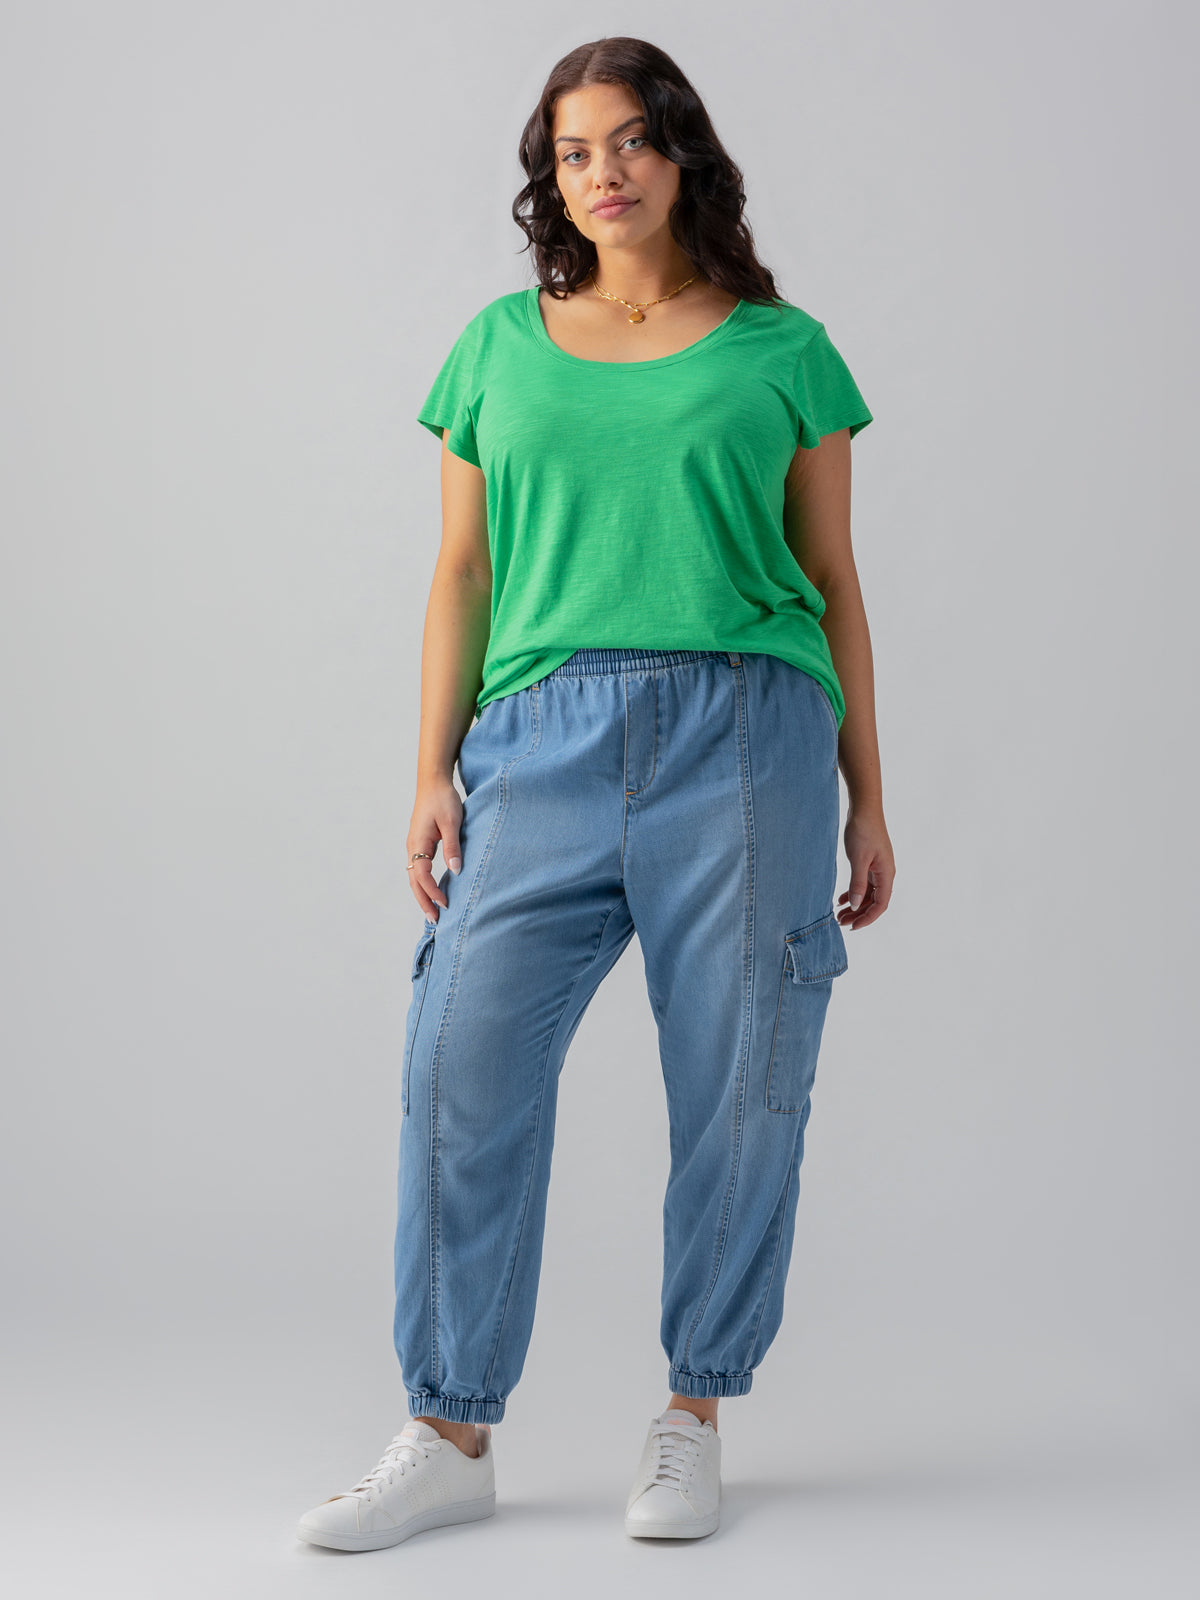 Relaxed Rebel Standard Rise Pant Sun Drenched Inclusive Collection